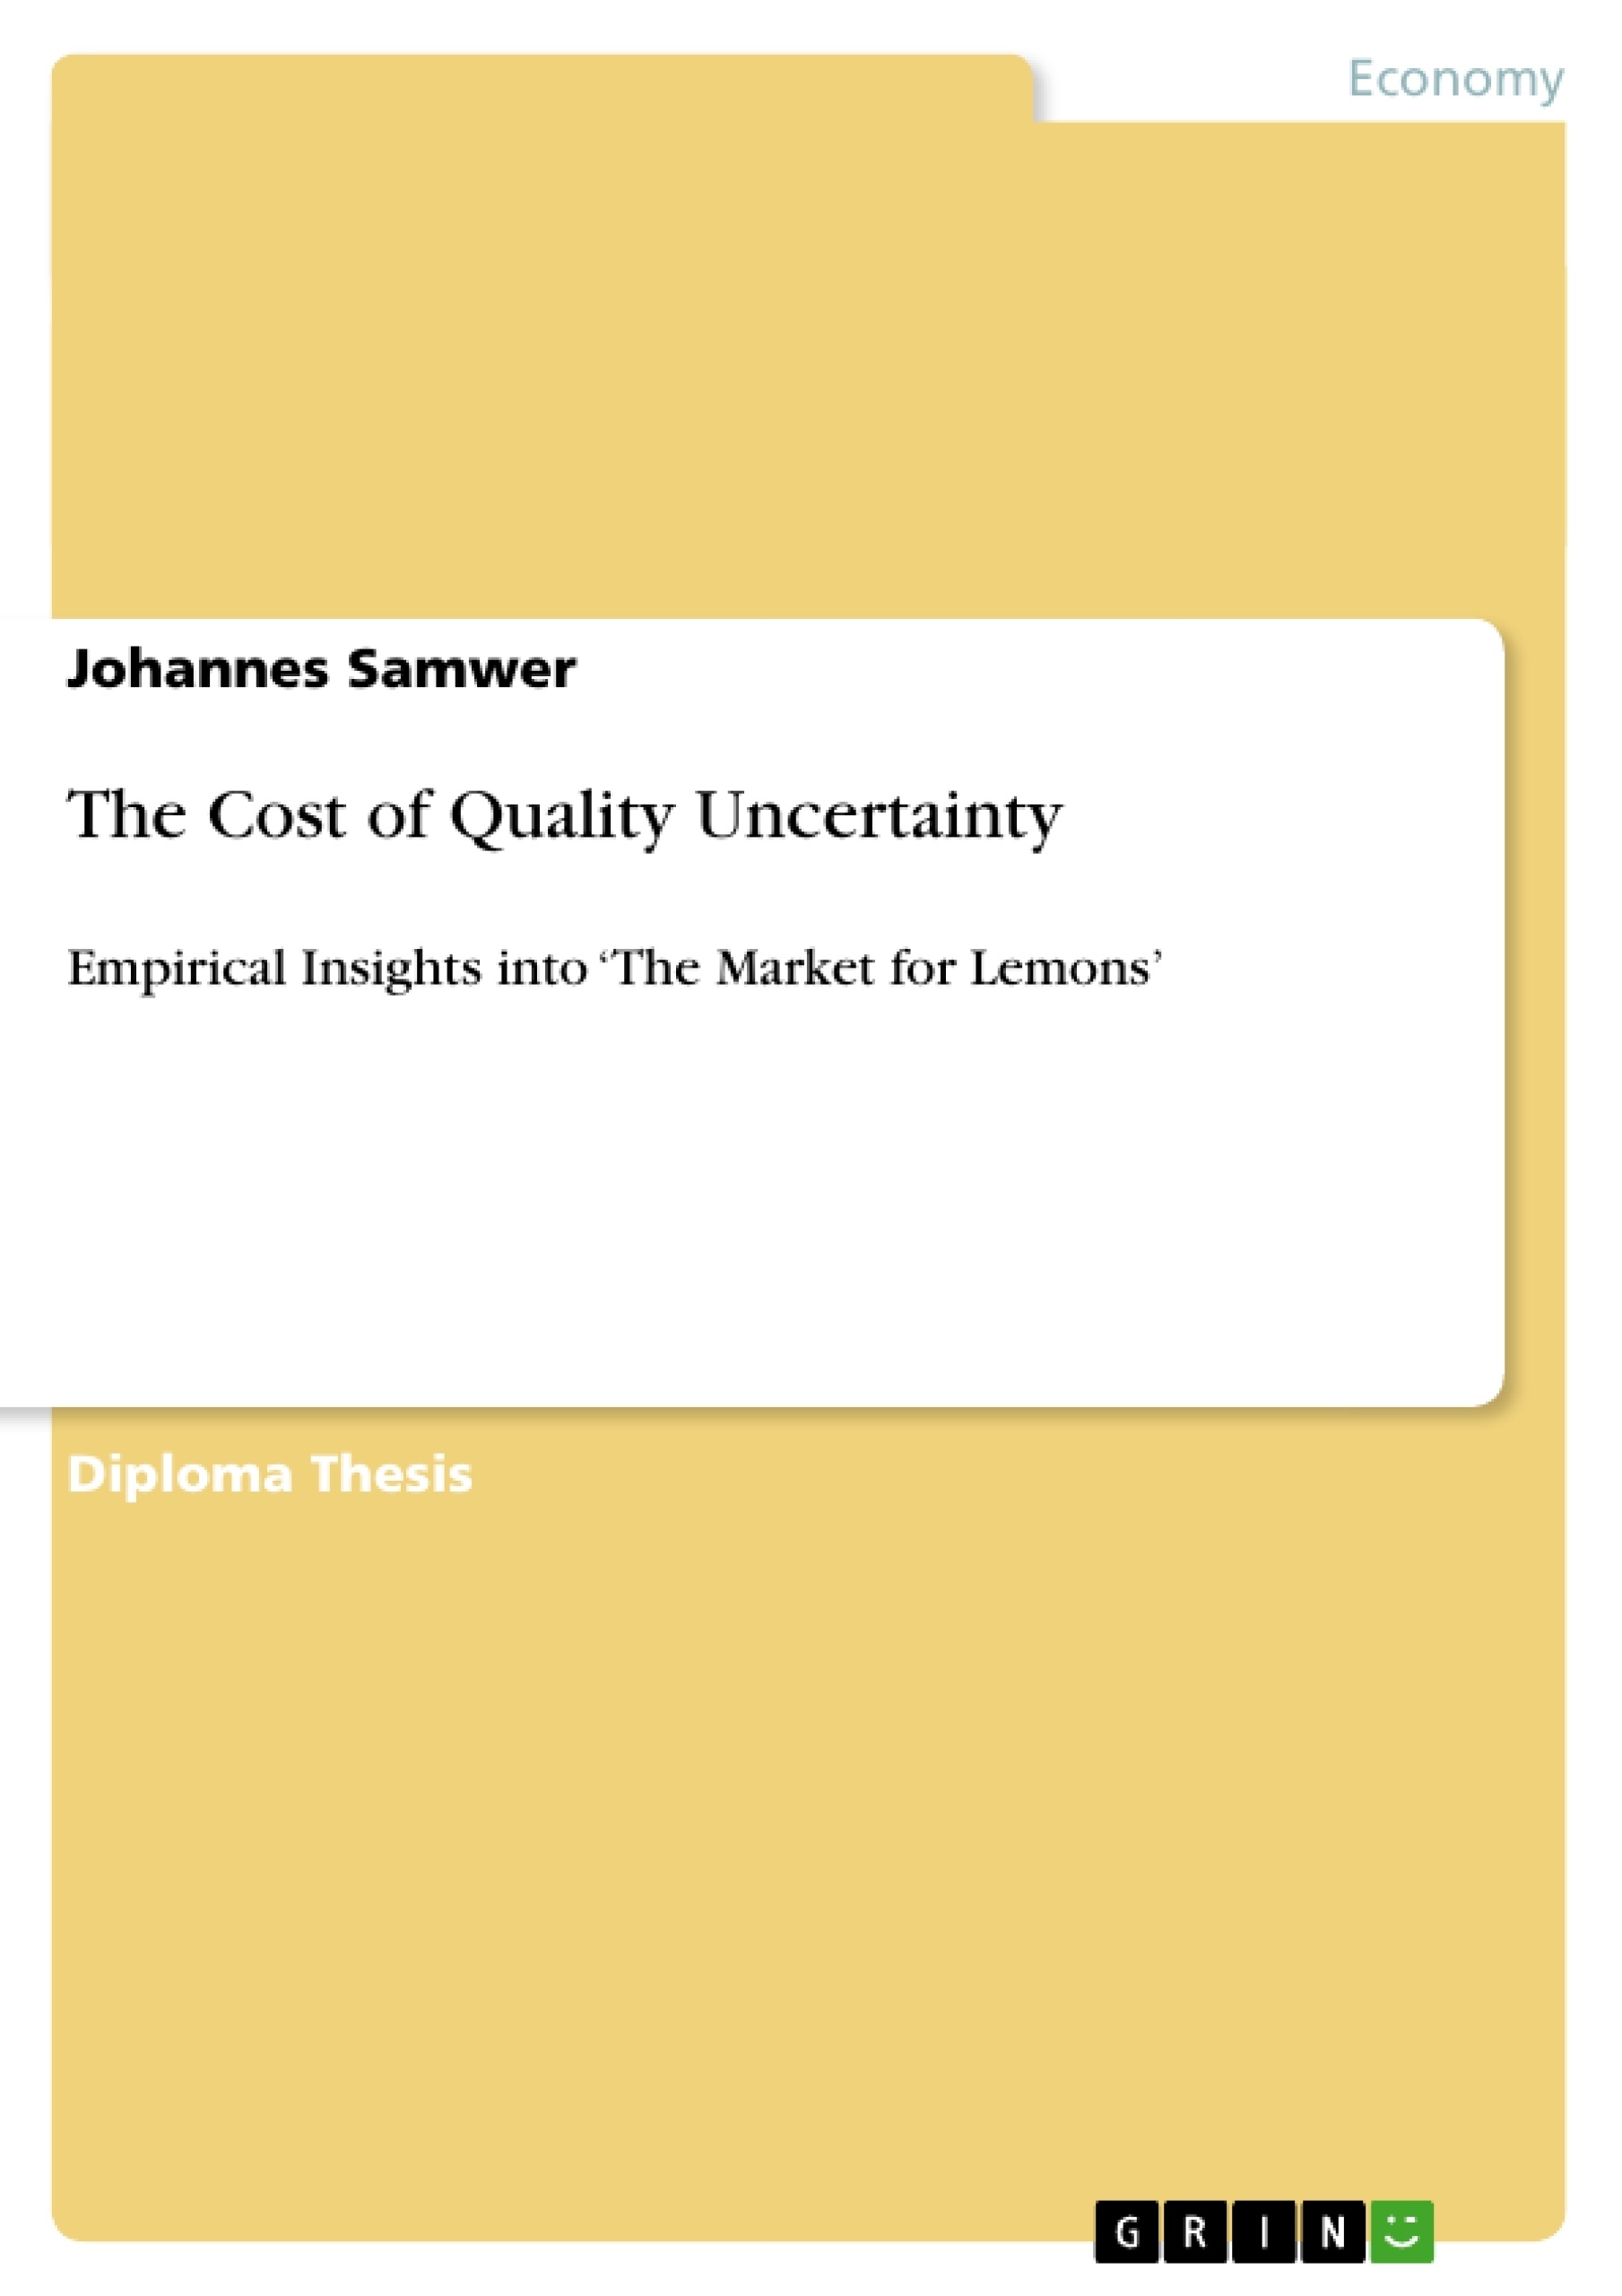 Title: The Cost of Quality Uncertainty